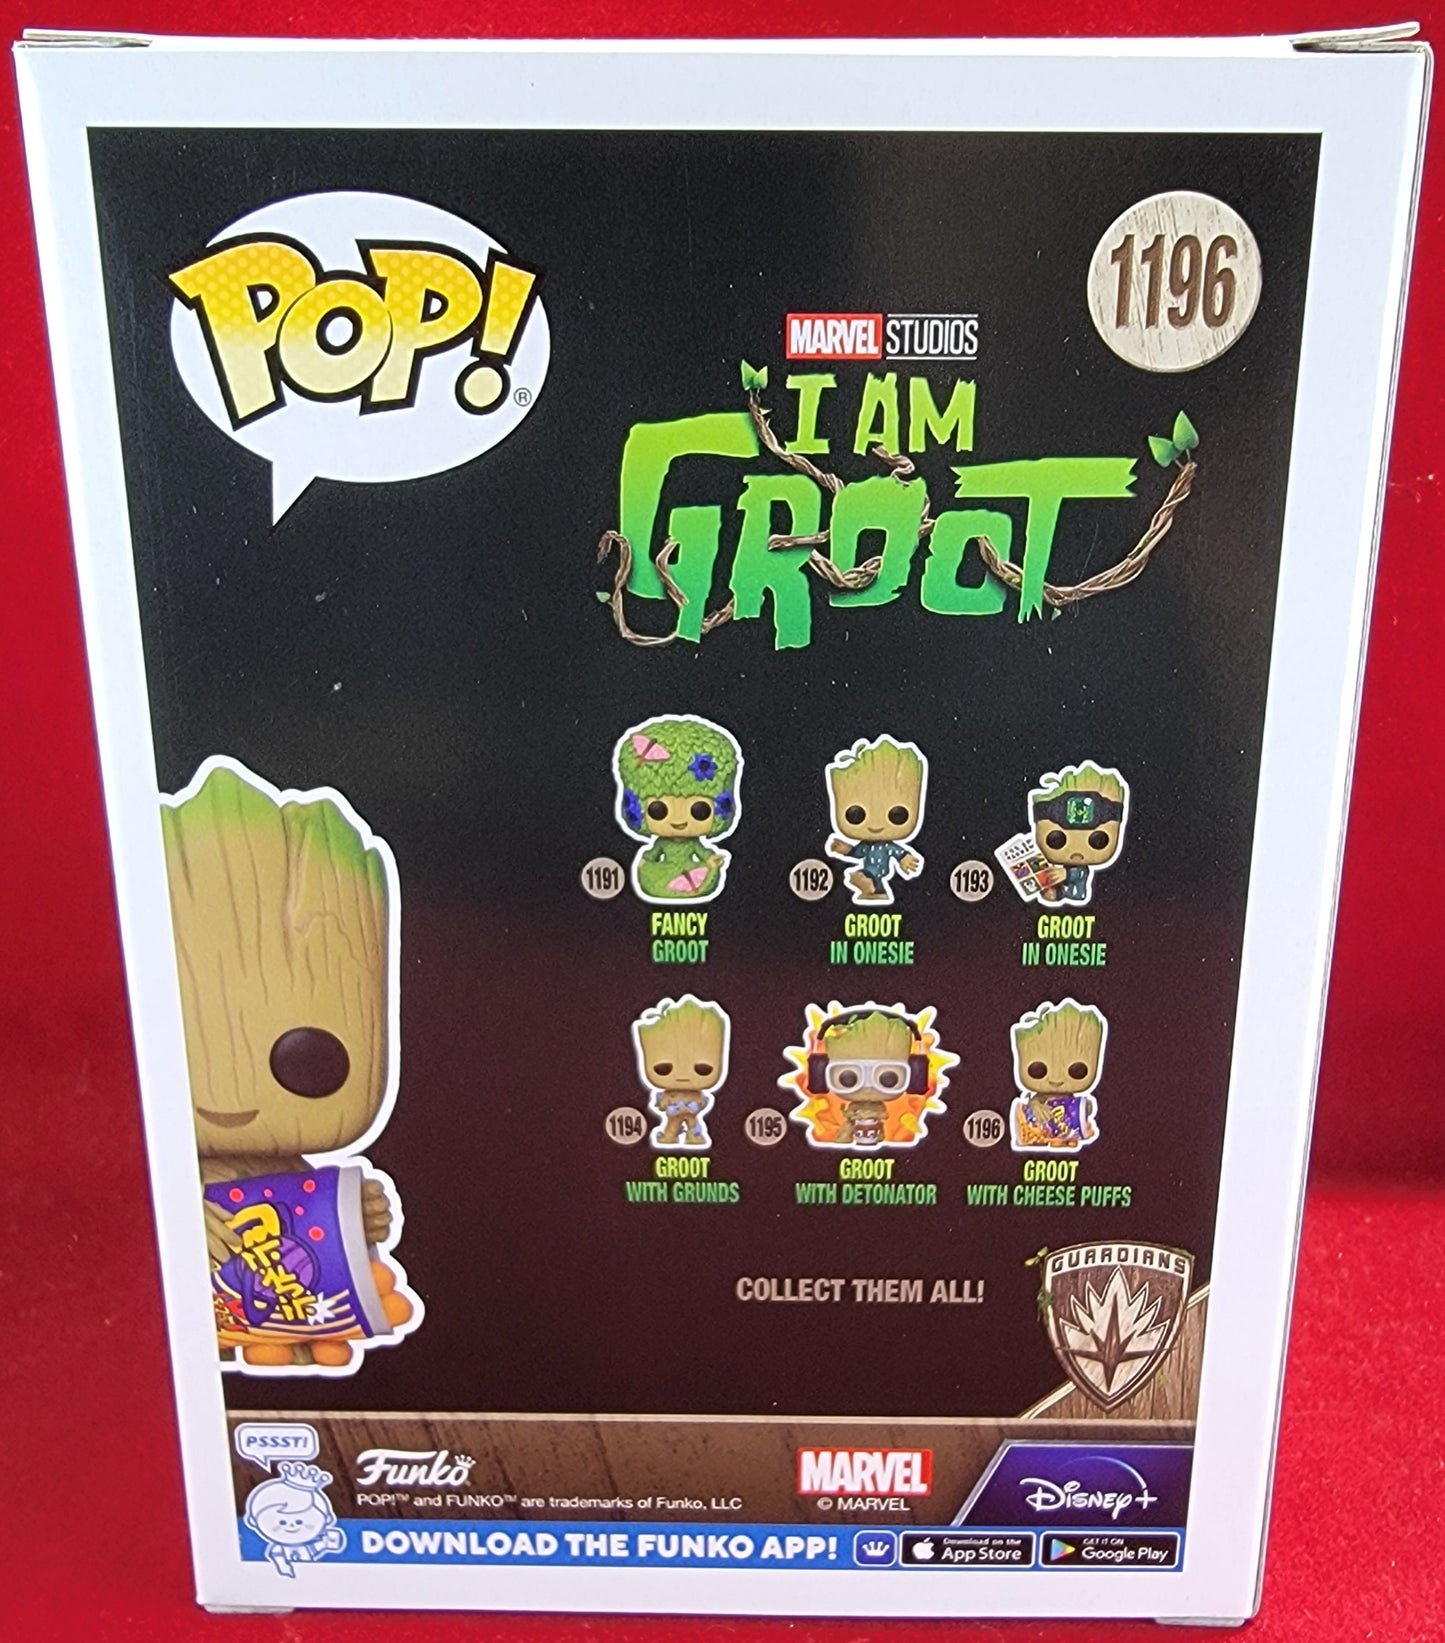 Groot with cheese puffs funko # 1196 (nib)
With pop protector